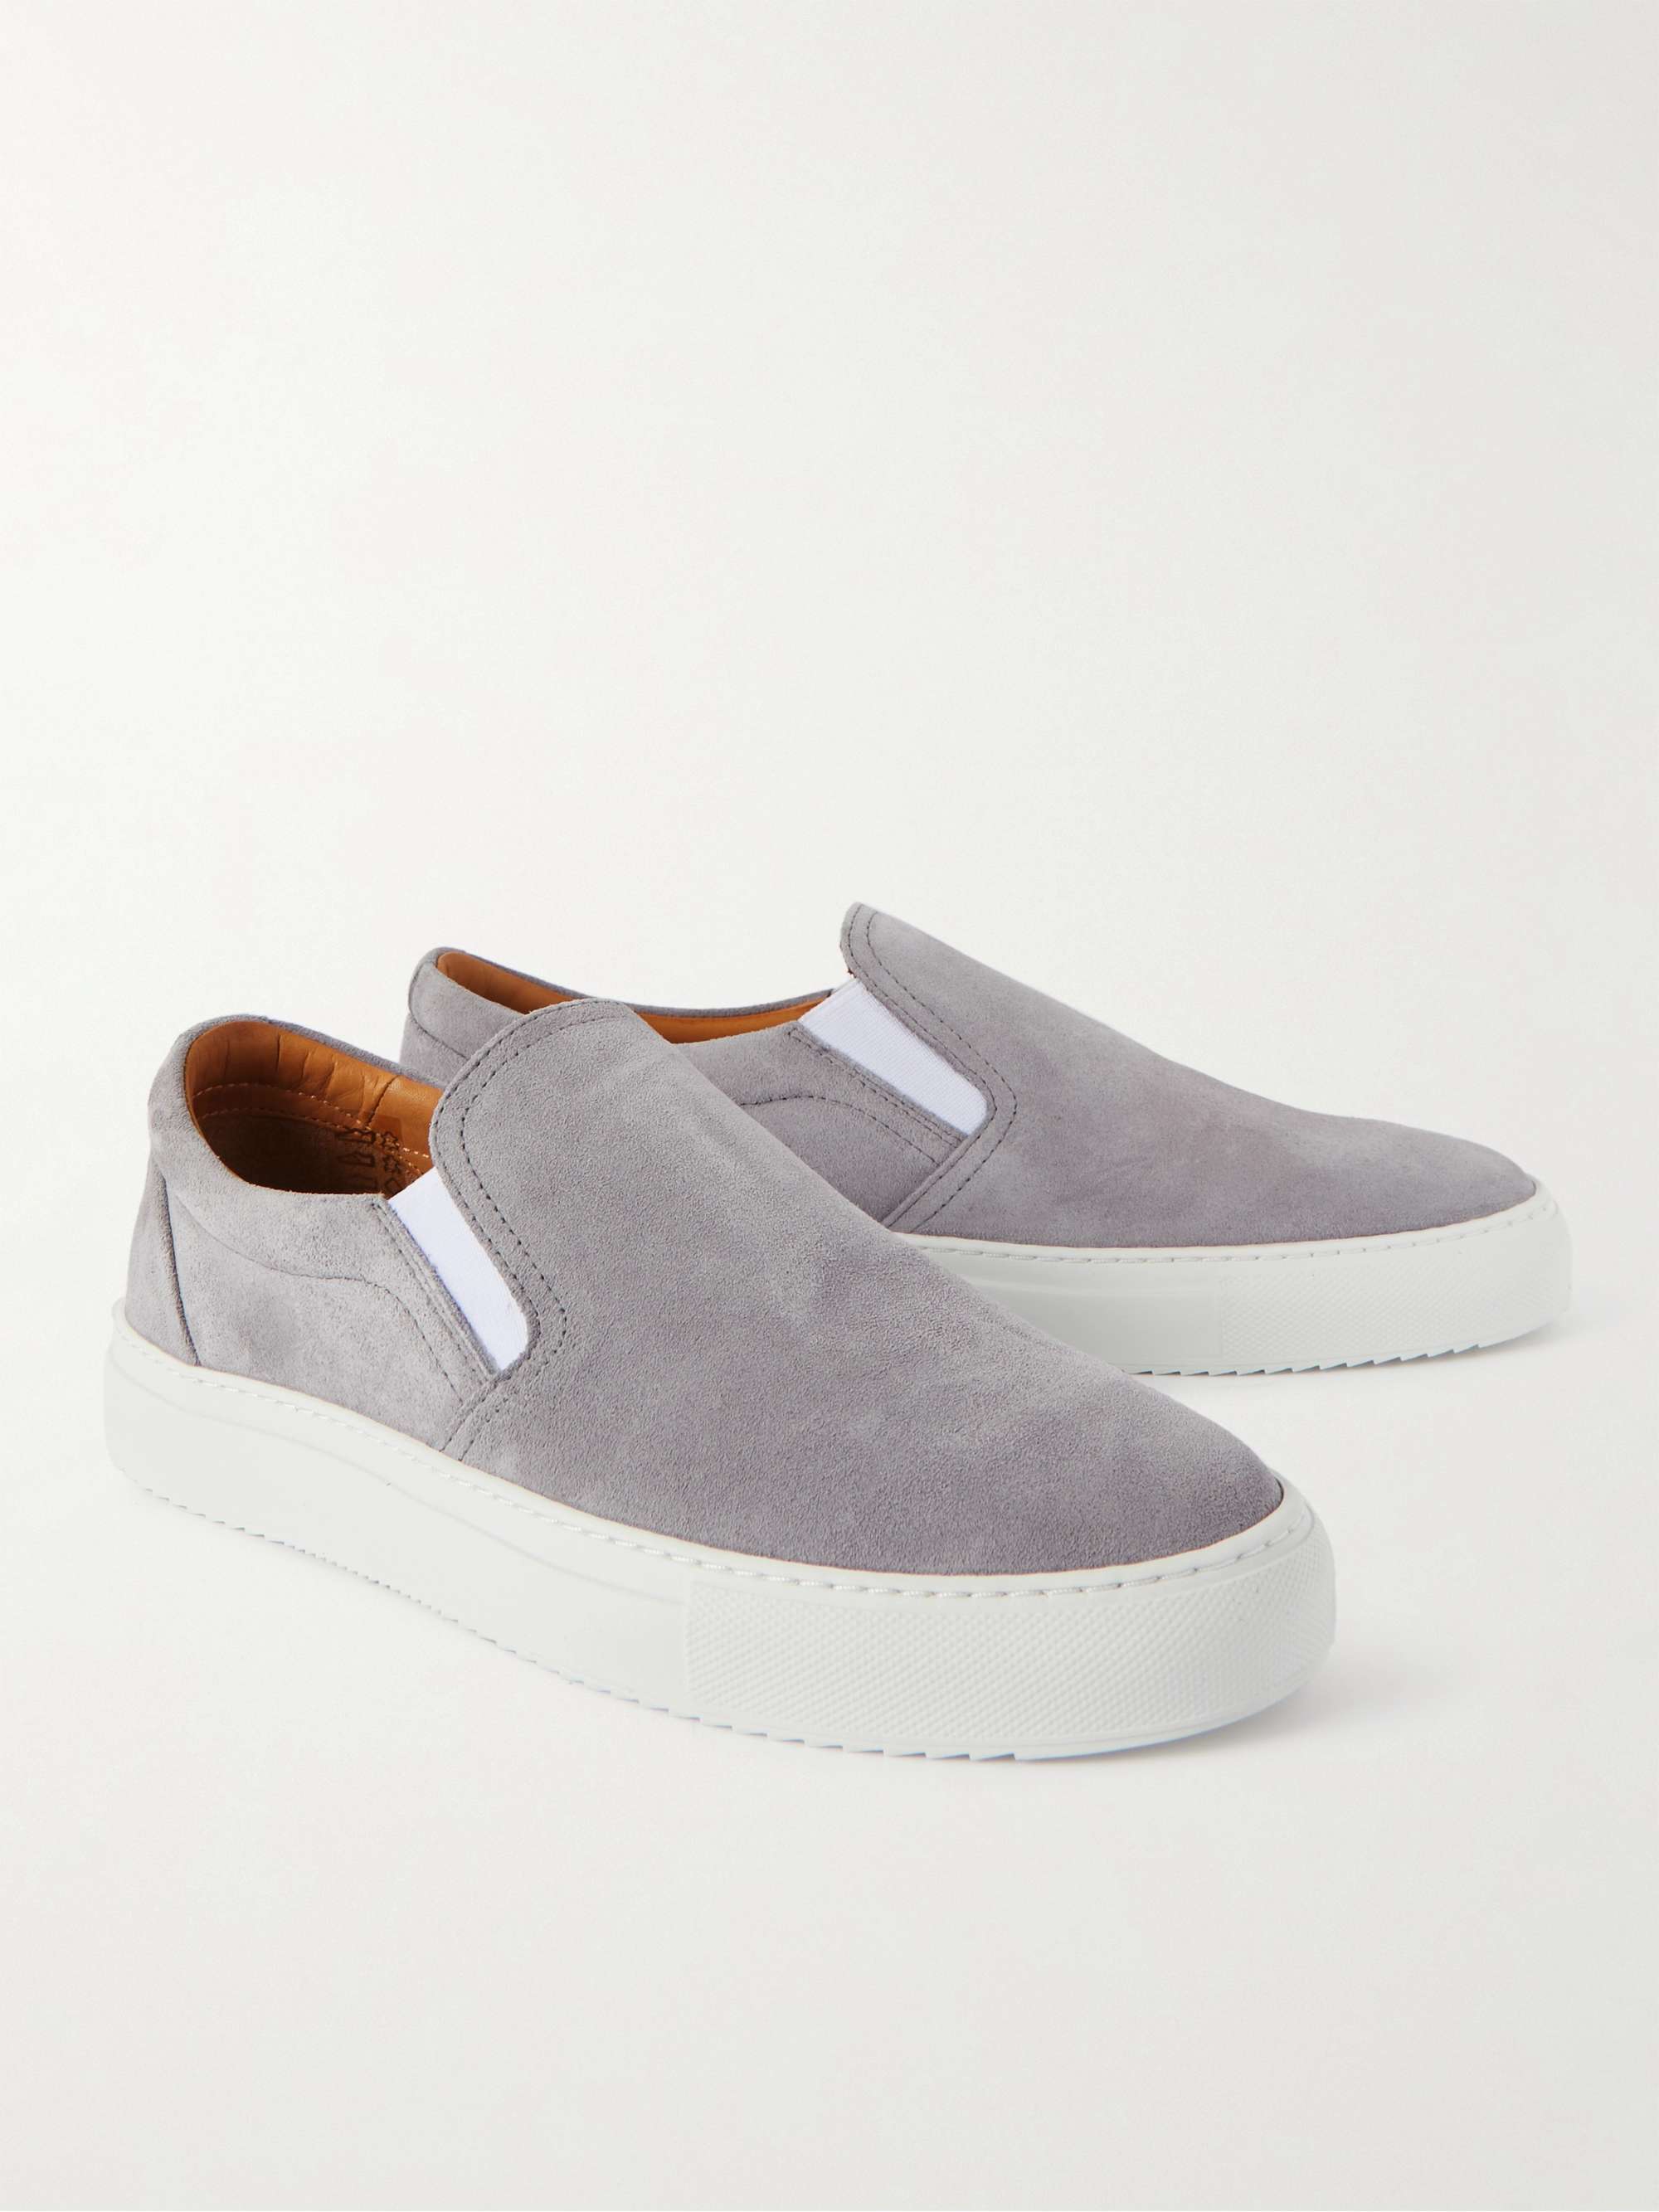 MR P. Regenerated Suede by evolo® Slip-On Sneakers